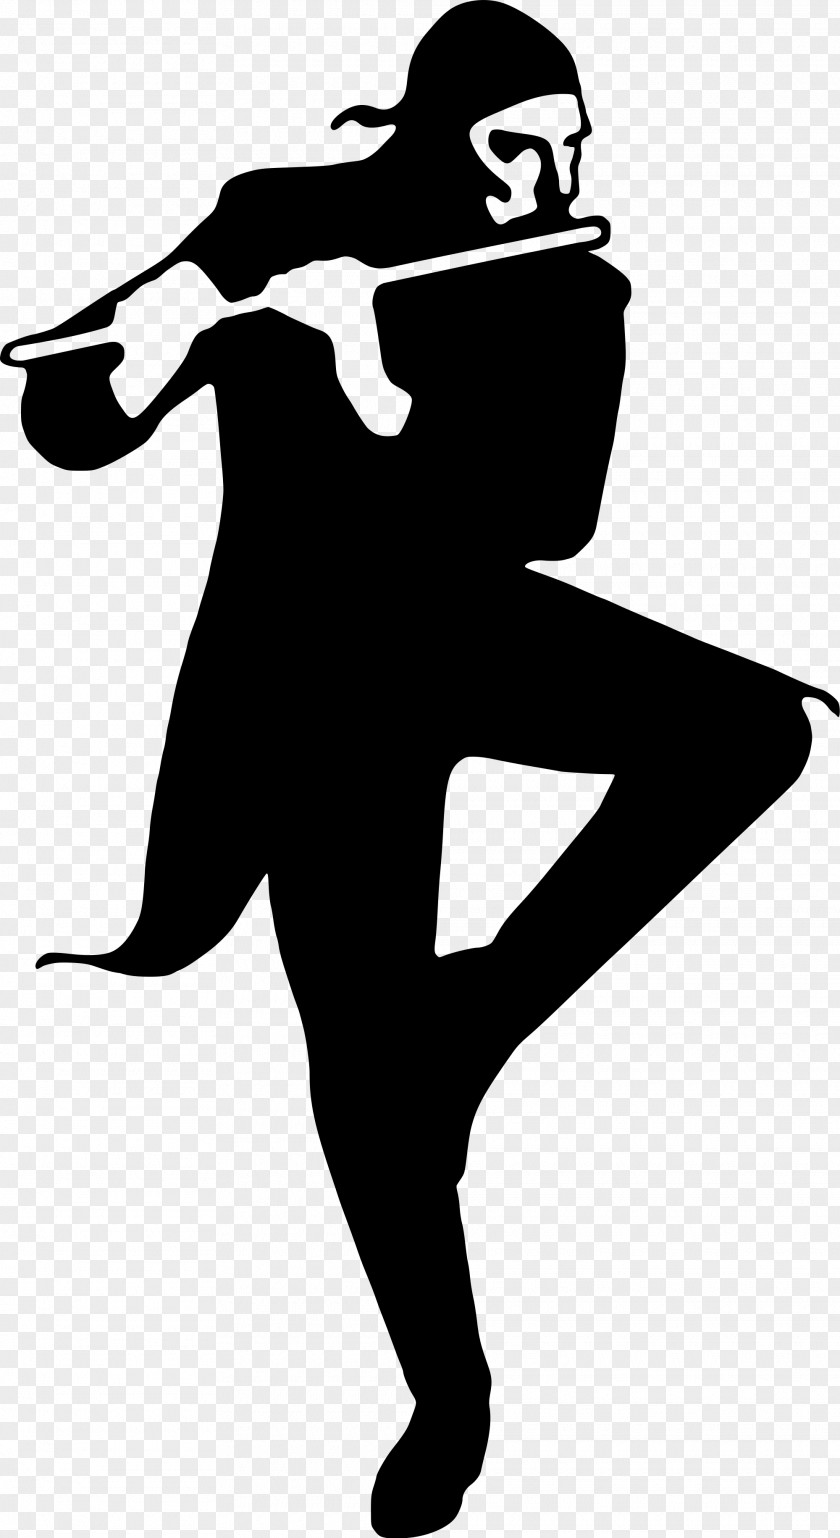 Band Silhouette Jethro Tull Musician Aqualung Concert Singer-songwriter PNG